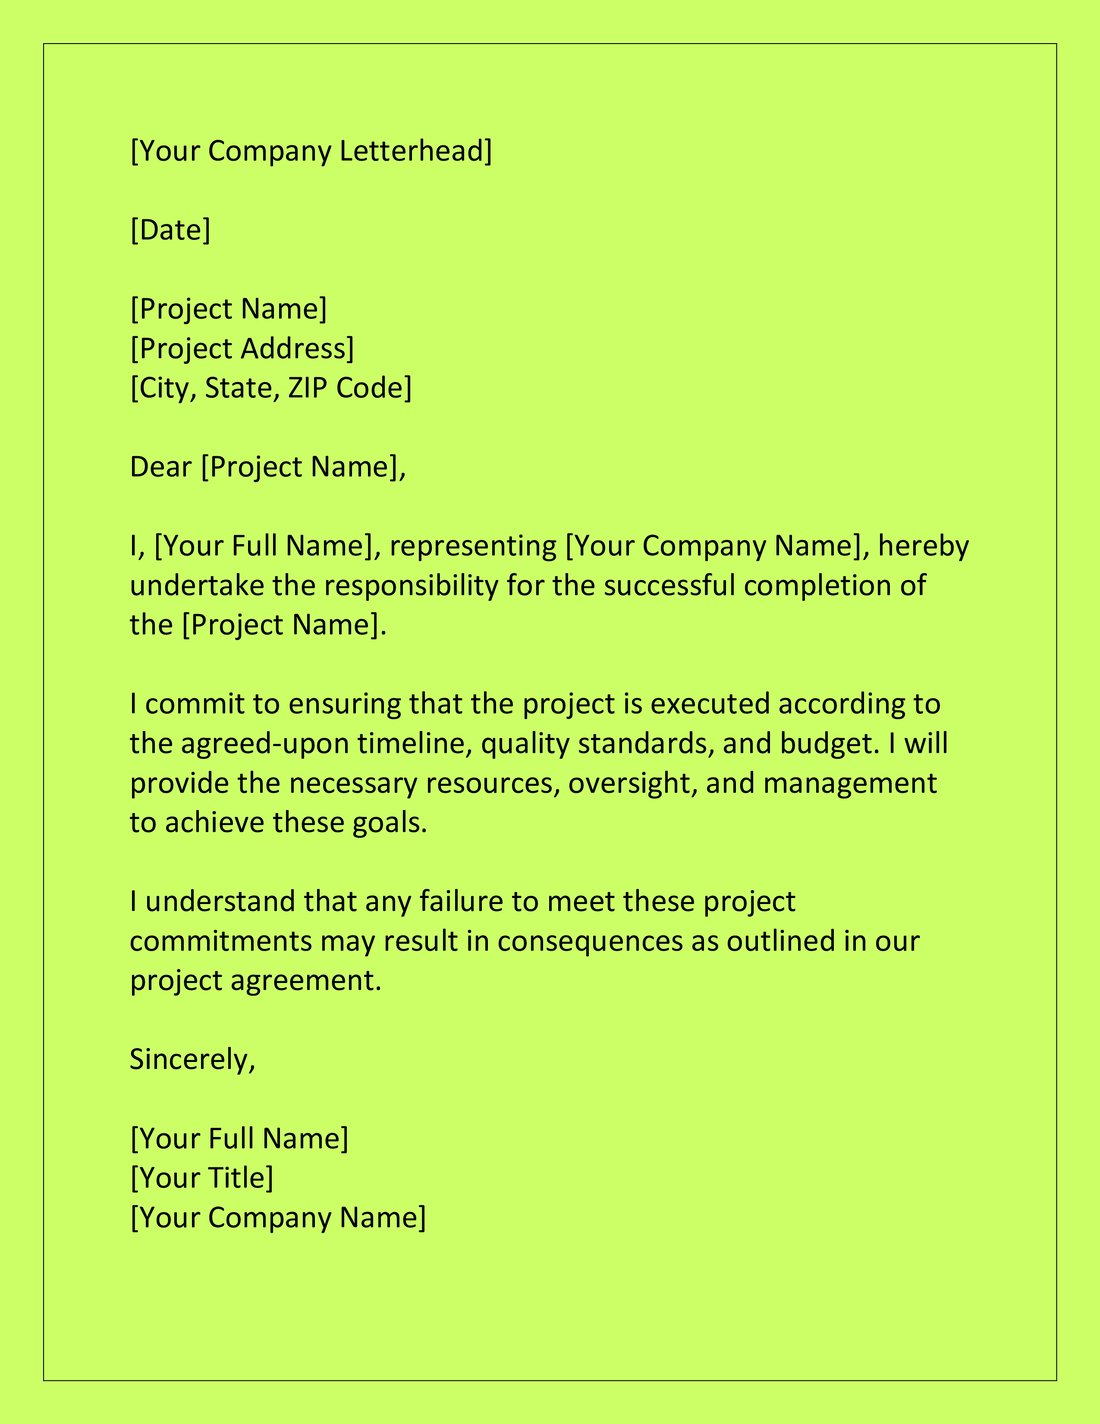 Project Undertaking Letter